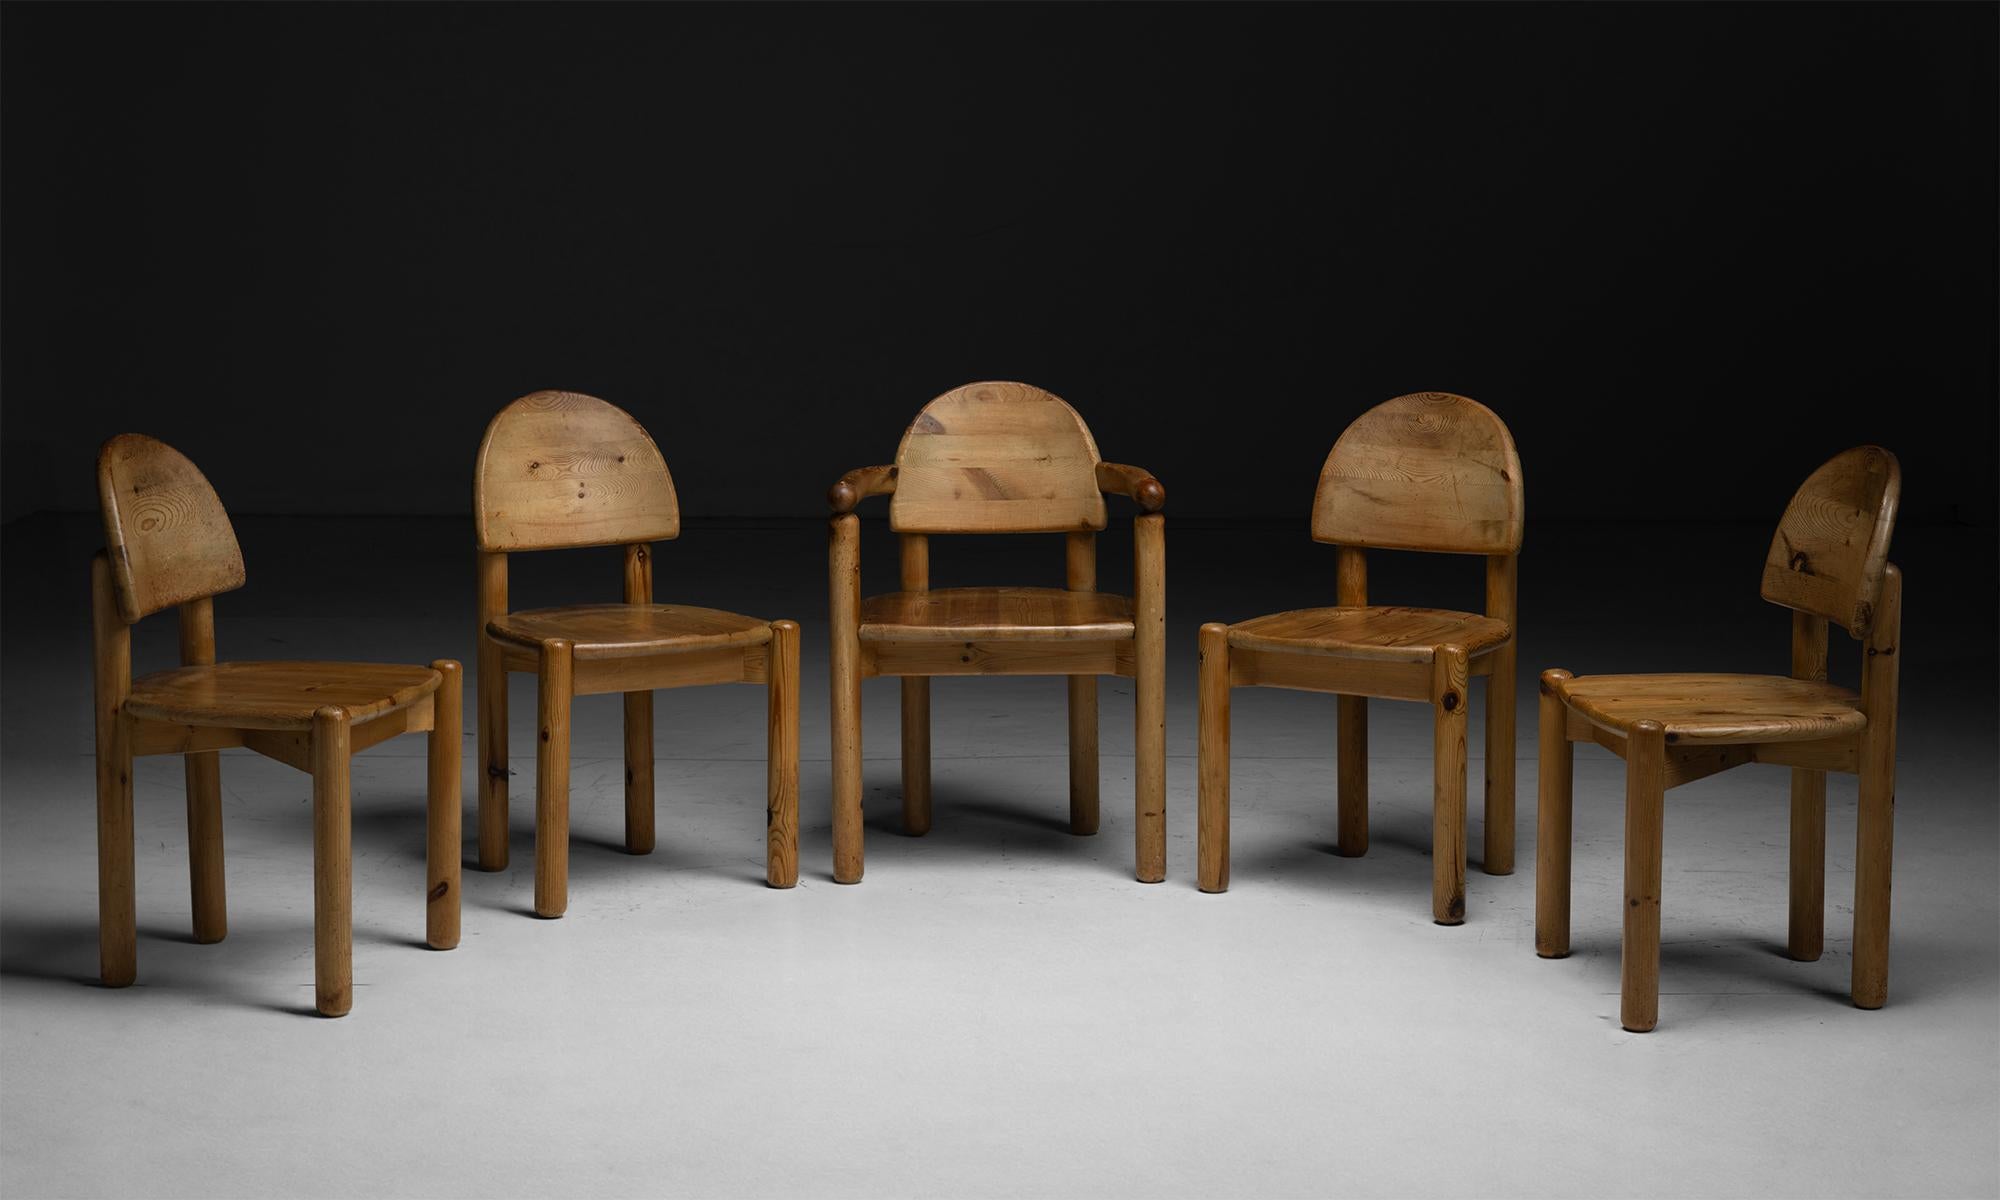 Rene Daumiller Dining Chairs

Denmark circa 1970

Constructed in pine, 2 armchairs and 4 chairs in matching patina.

19”w x 17.5”d x 32.25”h x 17”seat / WITH ARMS: 22.5”w x 20”d x 32.25”h x 17”seat